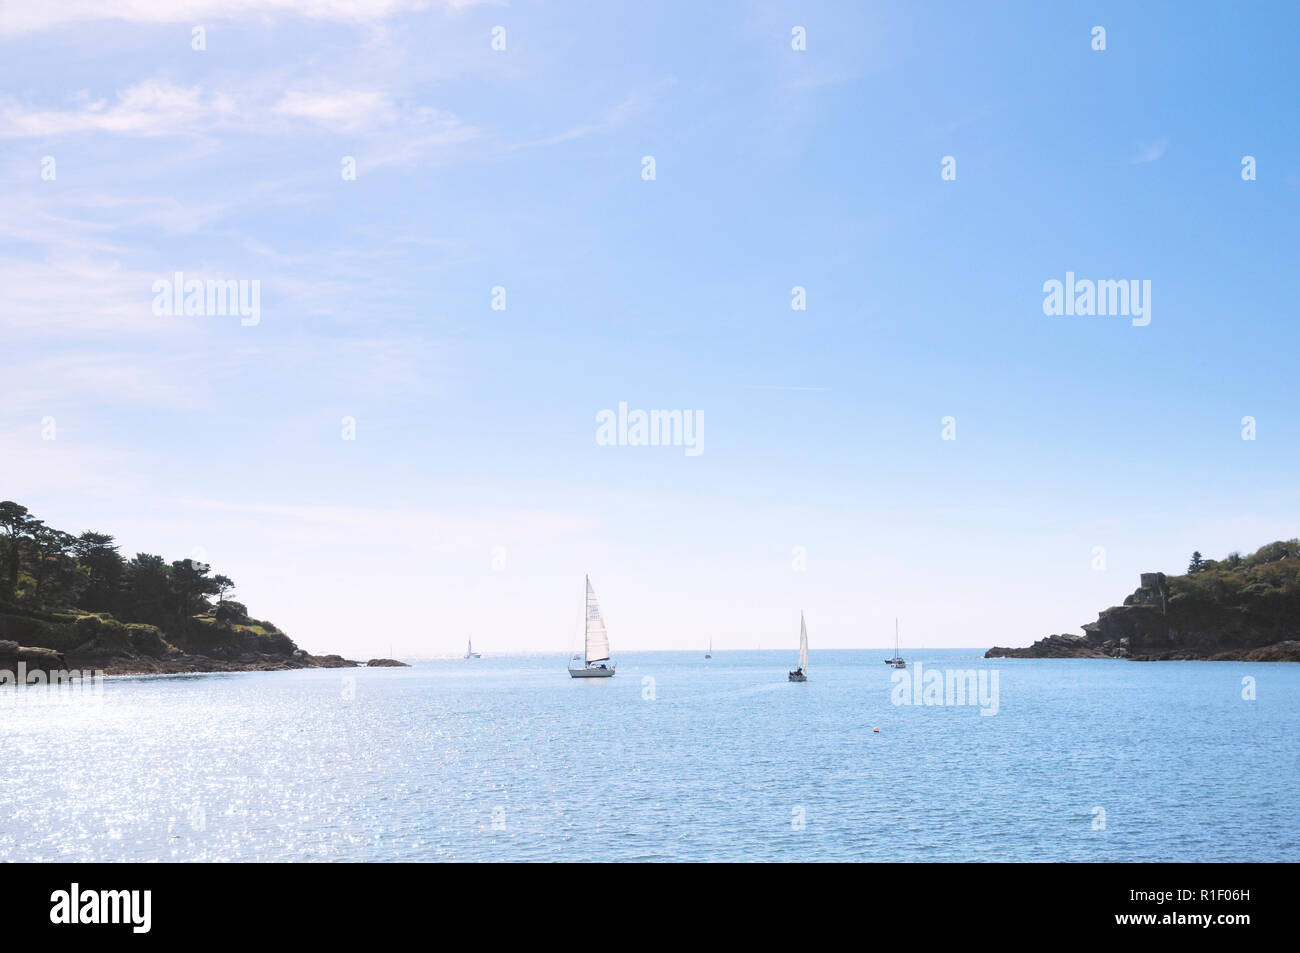 Sailing boats at the mouth of the River Fowey Estuary between Polruan and Fowey, Cornwall, England, UK Stock Photo